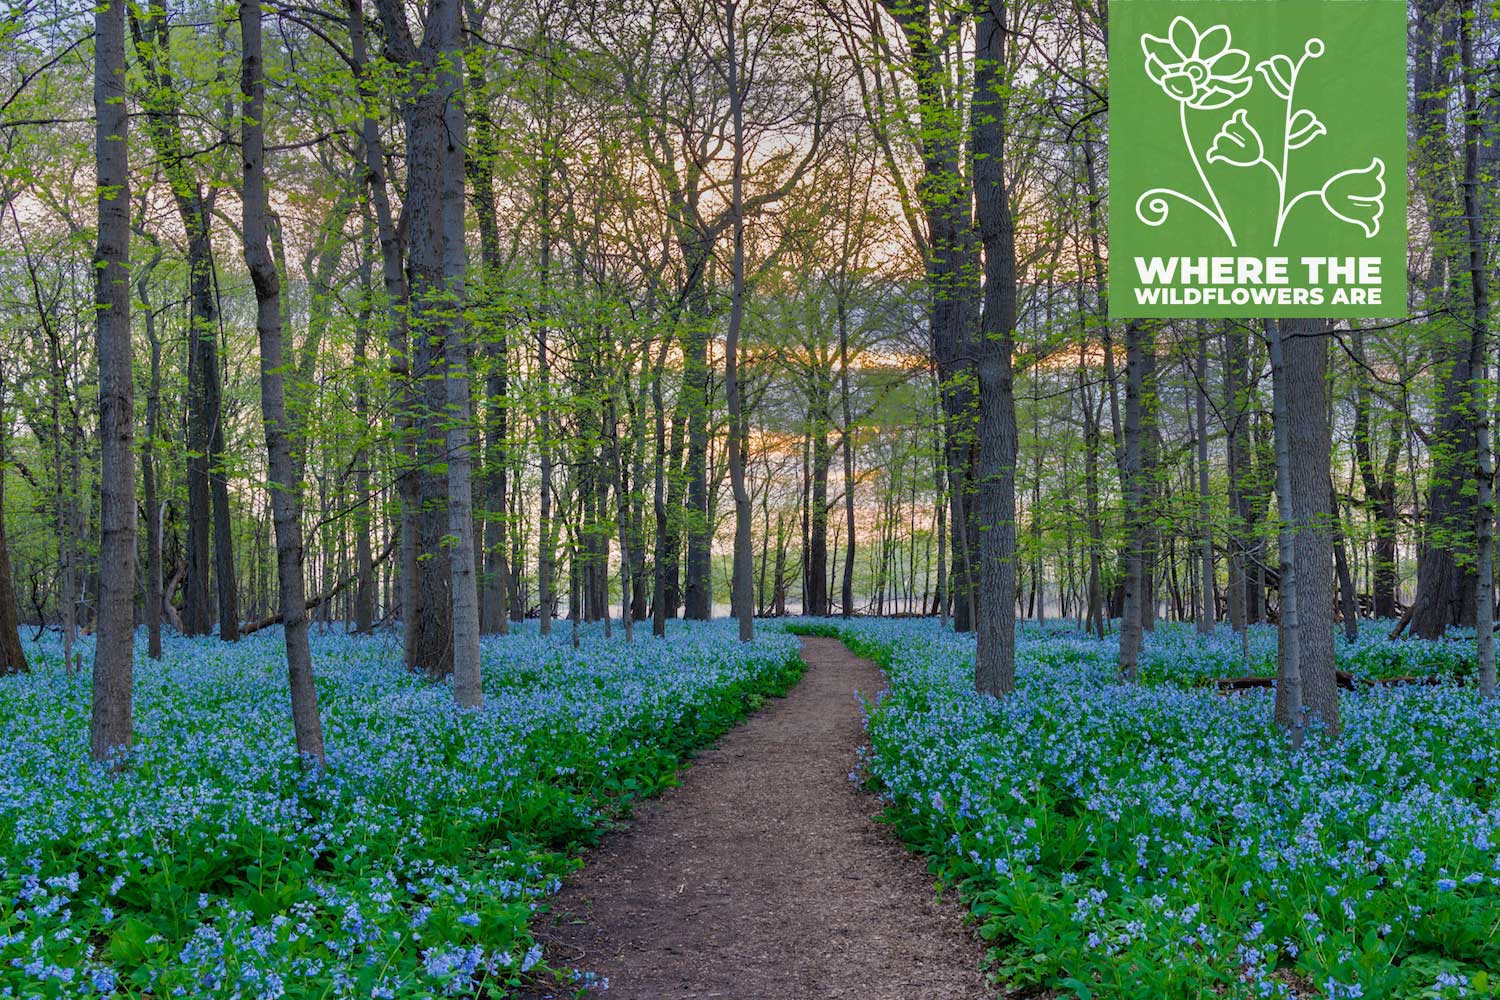 A dirt trail through a forest lined by bluebells in bloom.